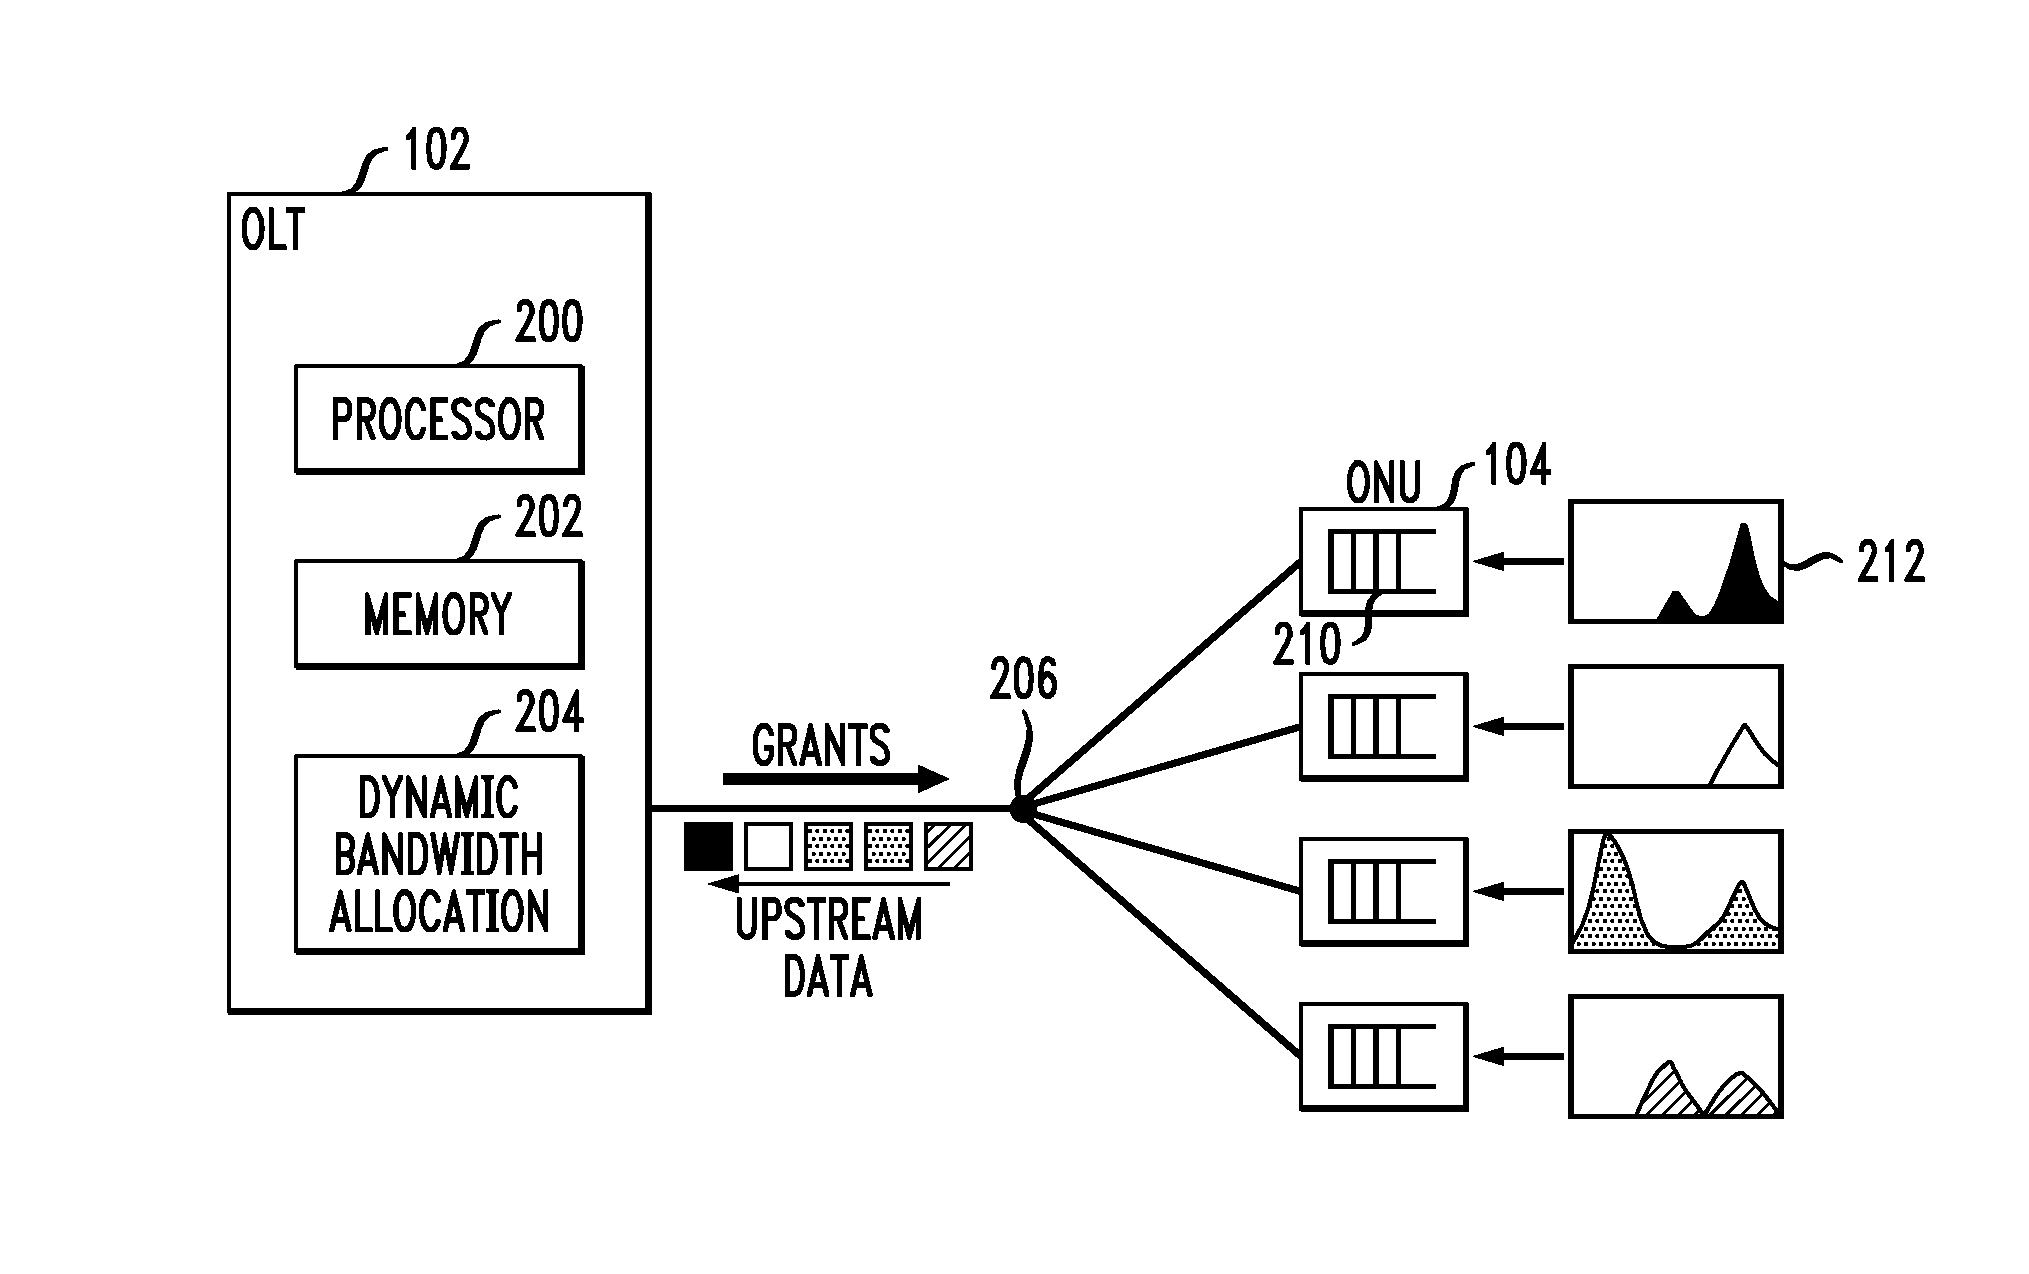 Allocating upstream bandwidth in an optical communication network